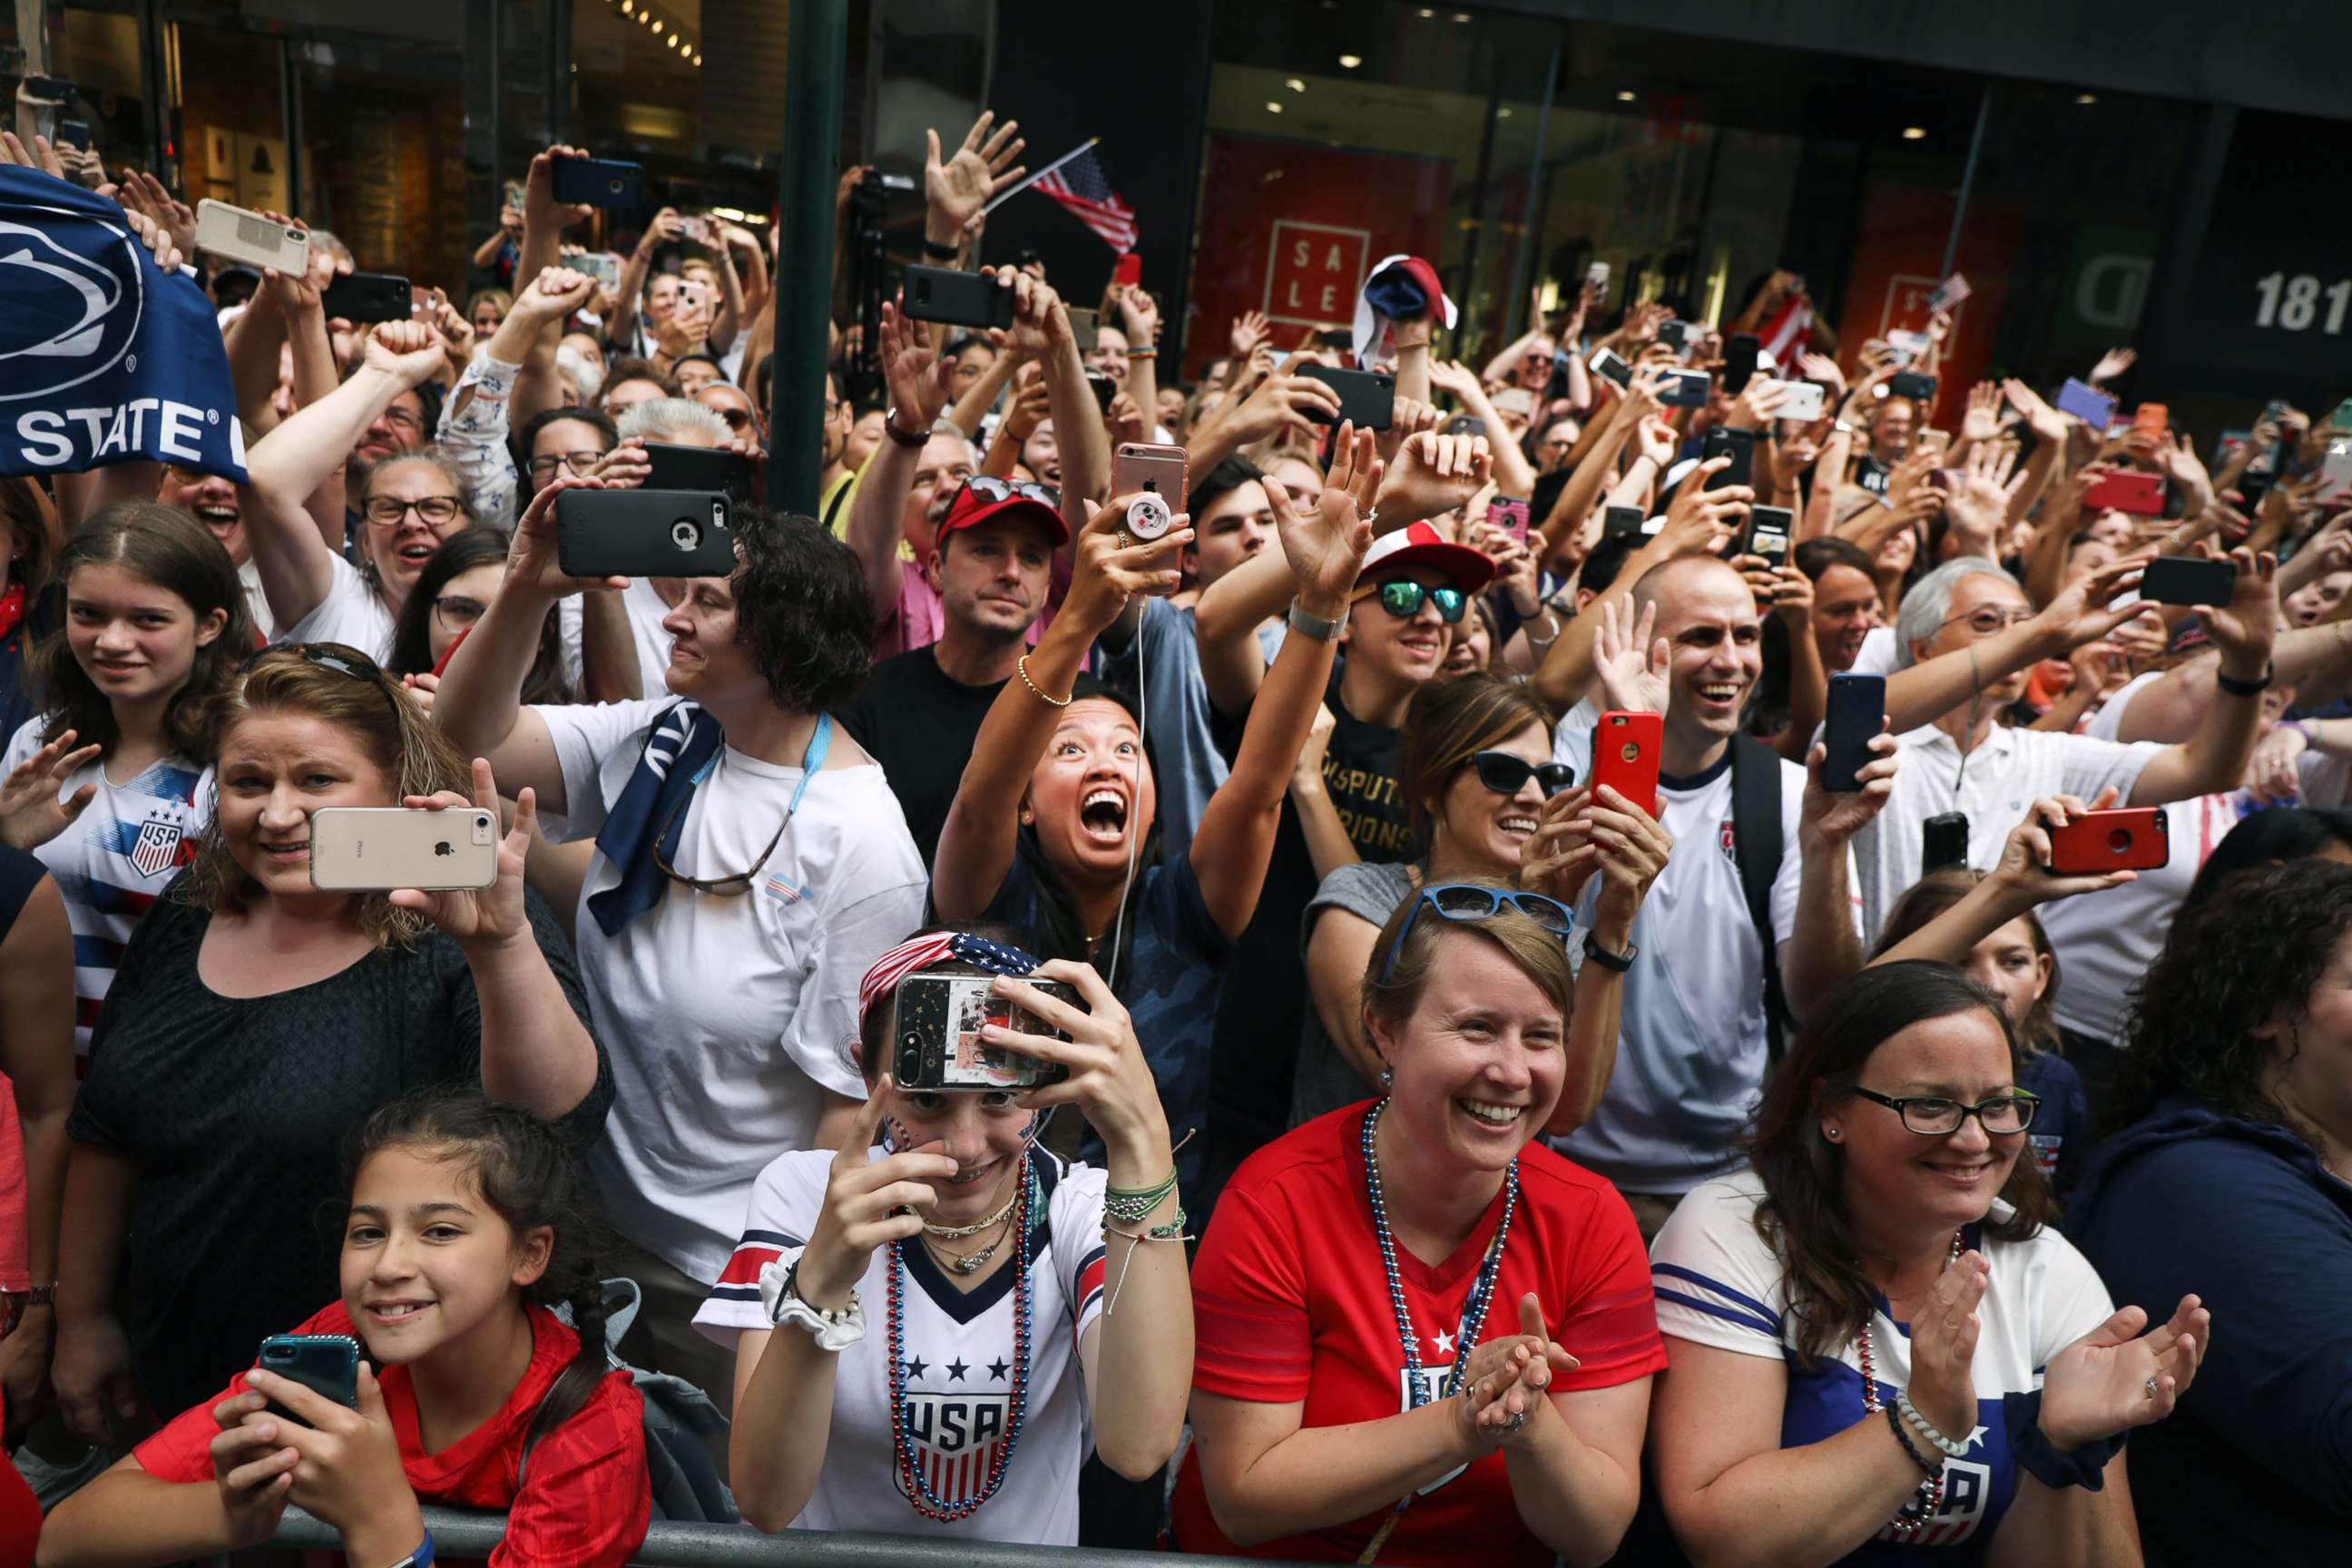 PHOTO: Fans cheer as members of the U.S. Women's  National Soccer Team travel down the "Canyon of Heroes" in a ticker tape parade, July 10, 2019, in New York City.